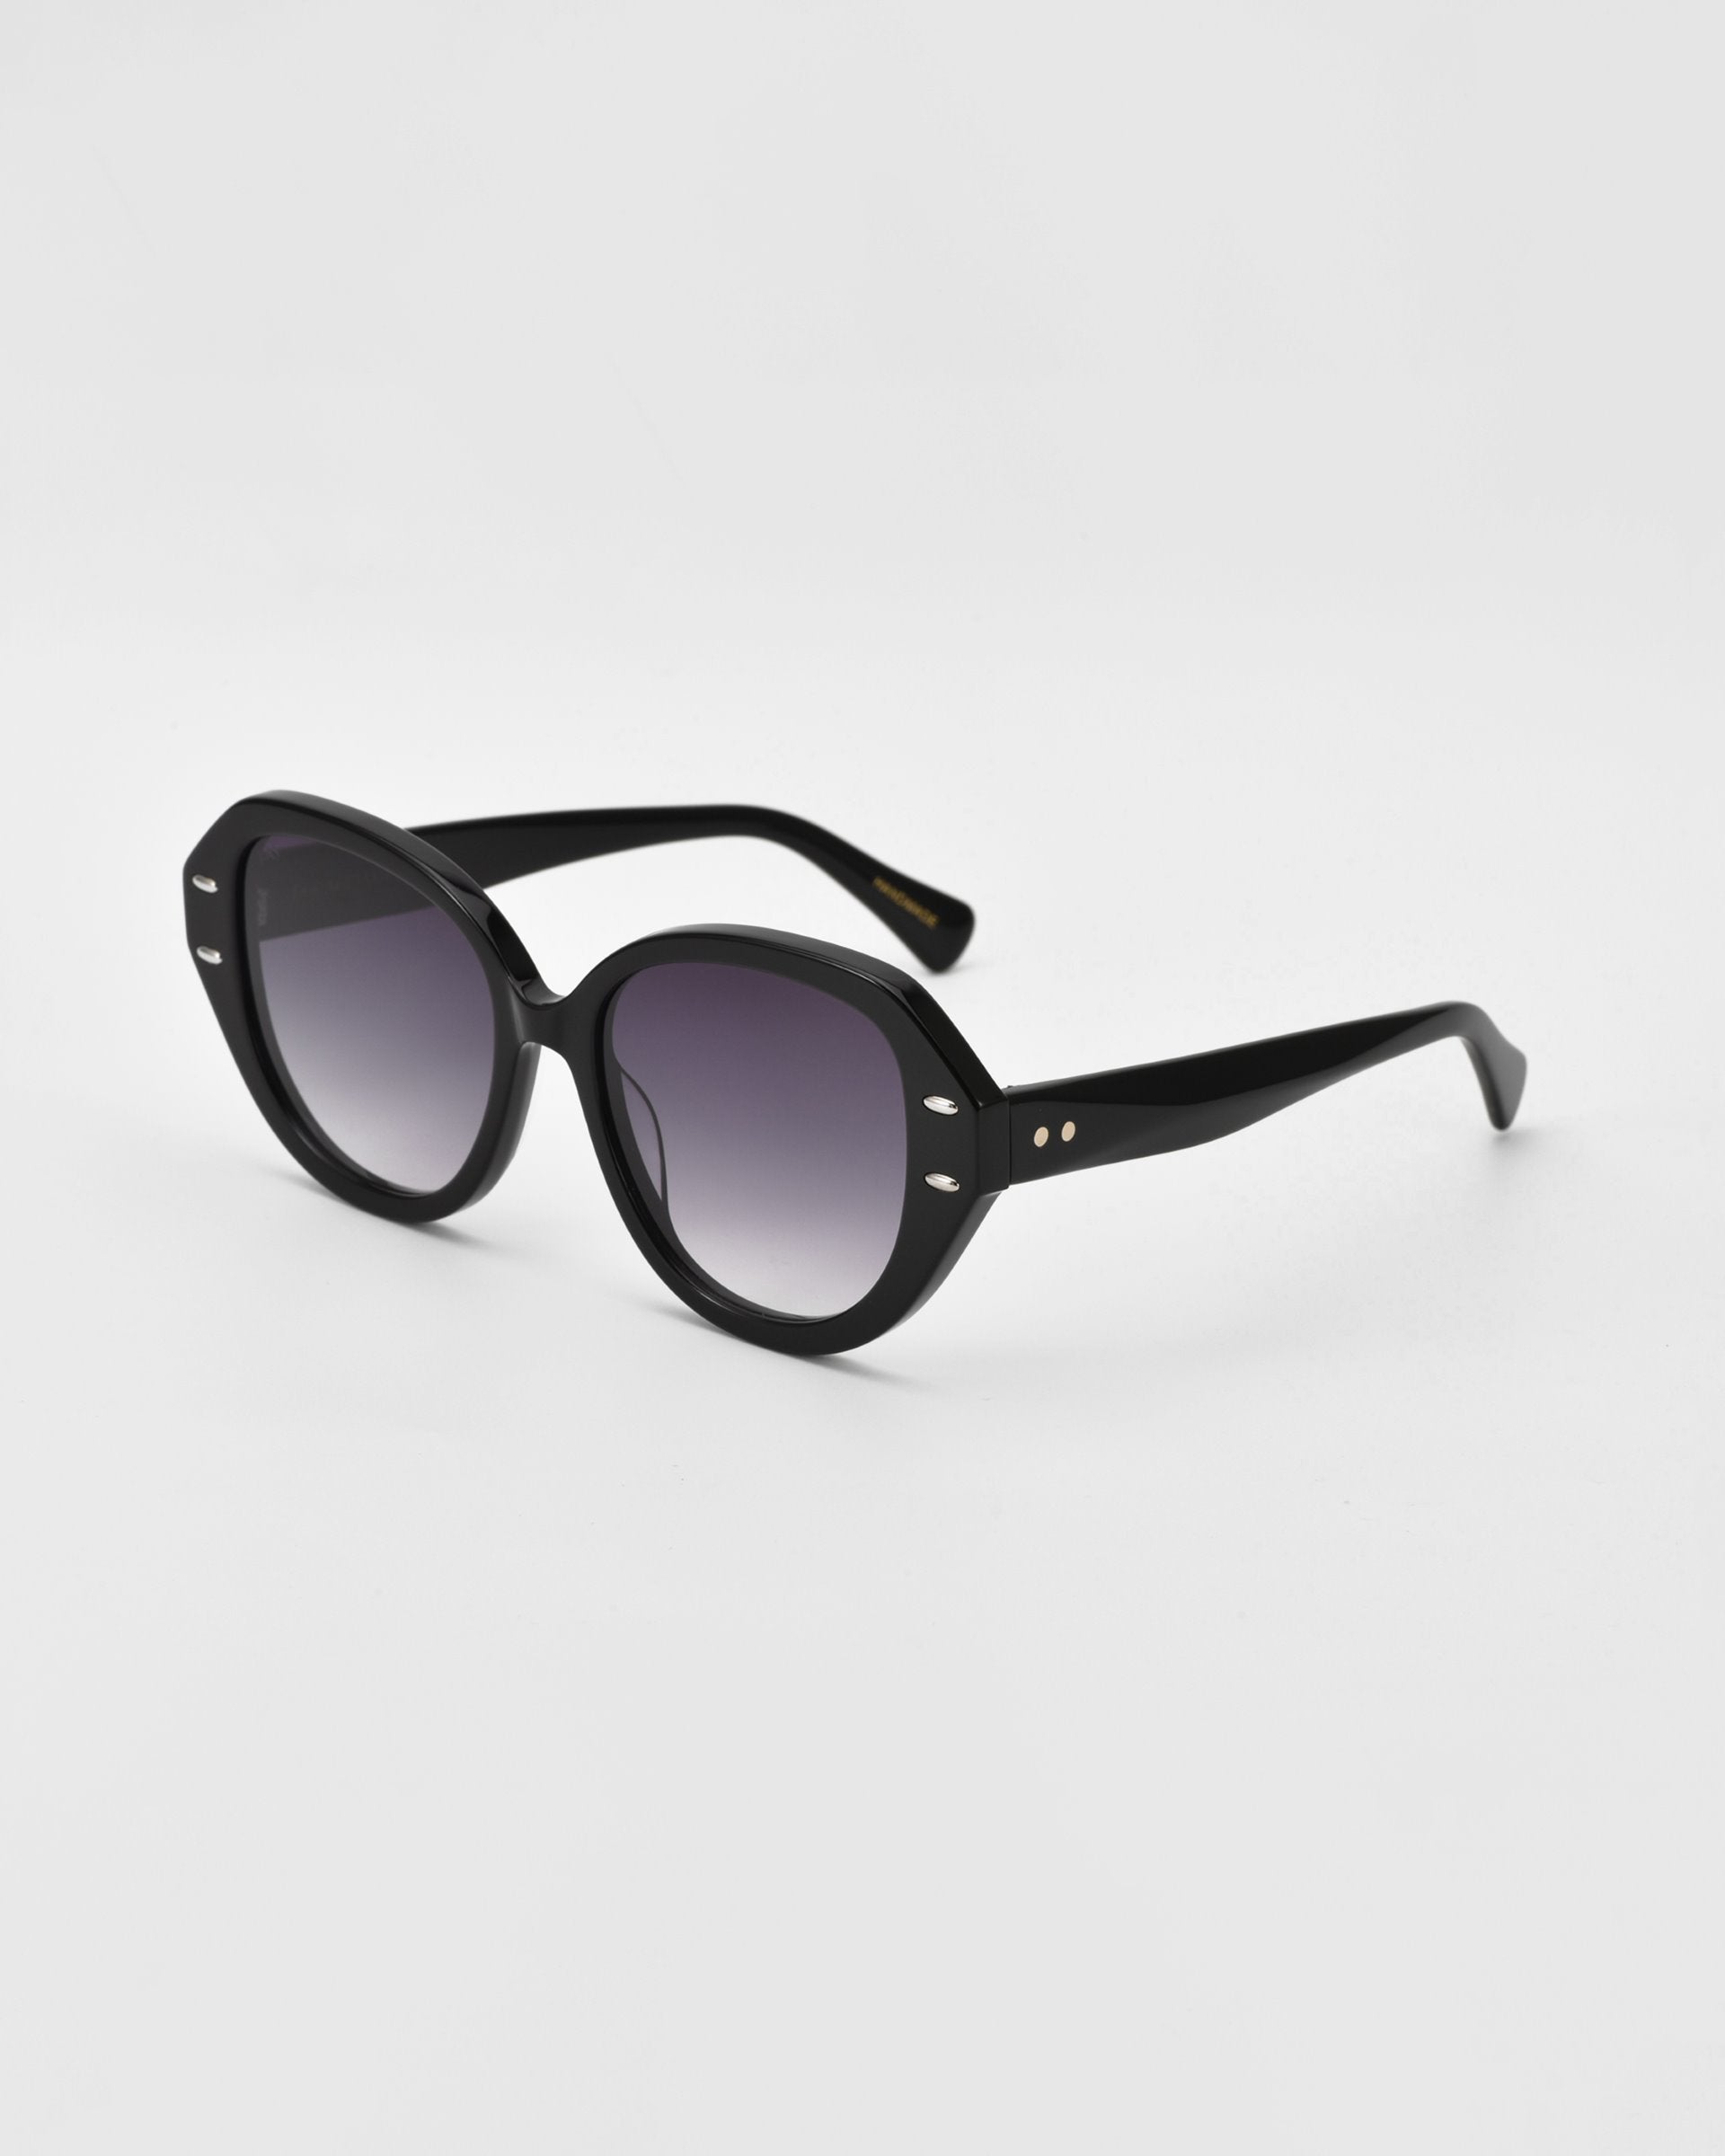 A pair of black round sunglasses with dark tinted lenses. The frame, crafted from plant-based acetate, has a glossy finish with small metallic accents near the hinges on the arms. The background is plain white.

Mirage by For Art's Sake®